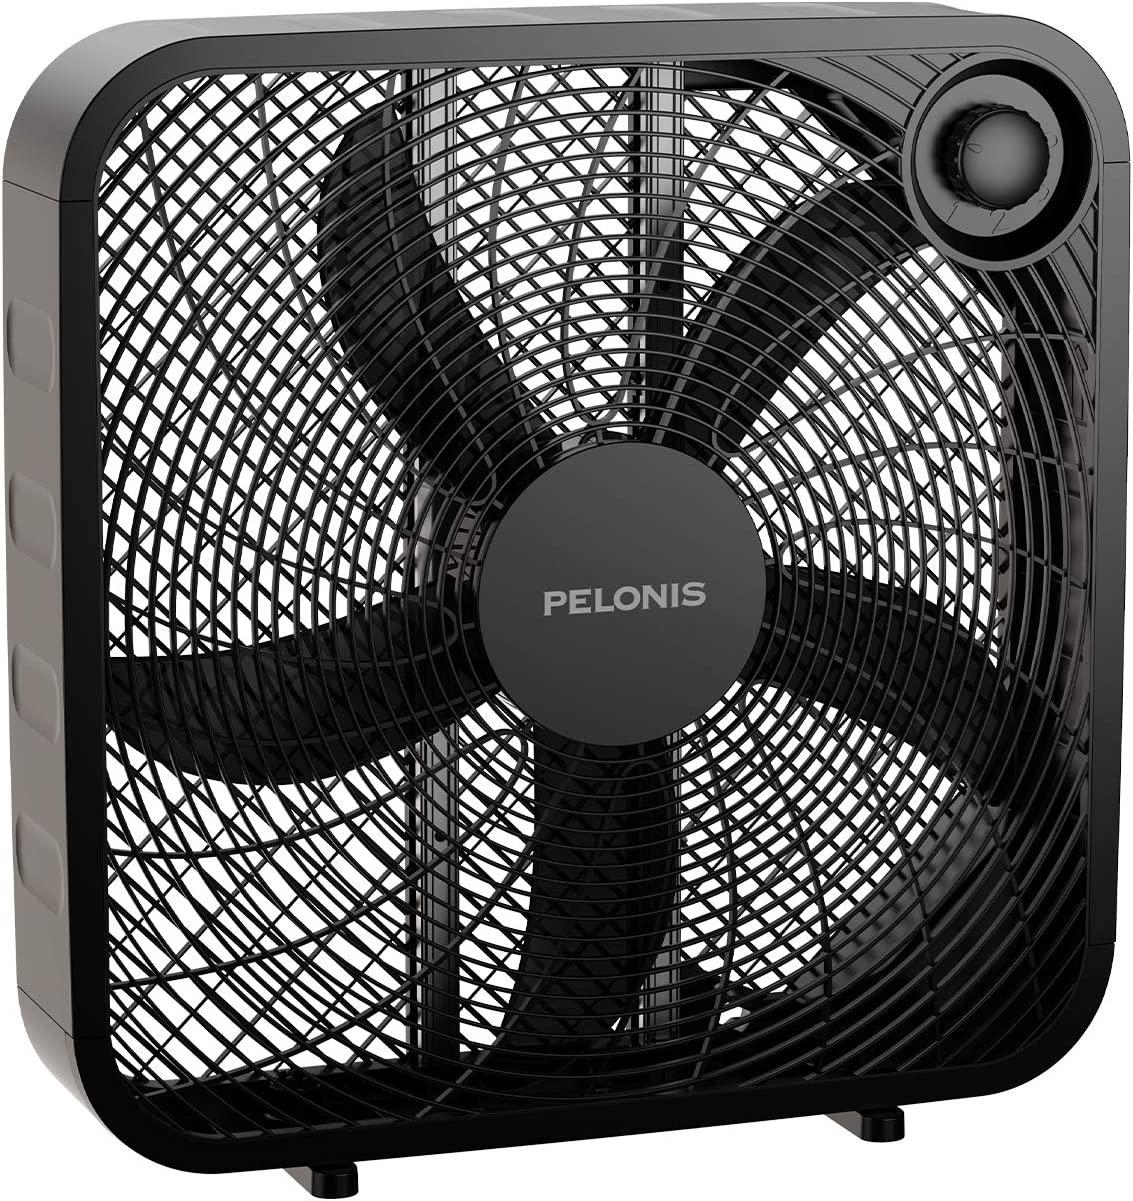 3-Speed Box Fan For Full-Force Circulation With Air Conditioner, Upgrade Floor Fan, Black-